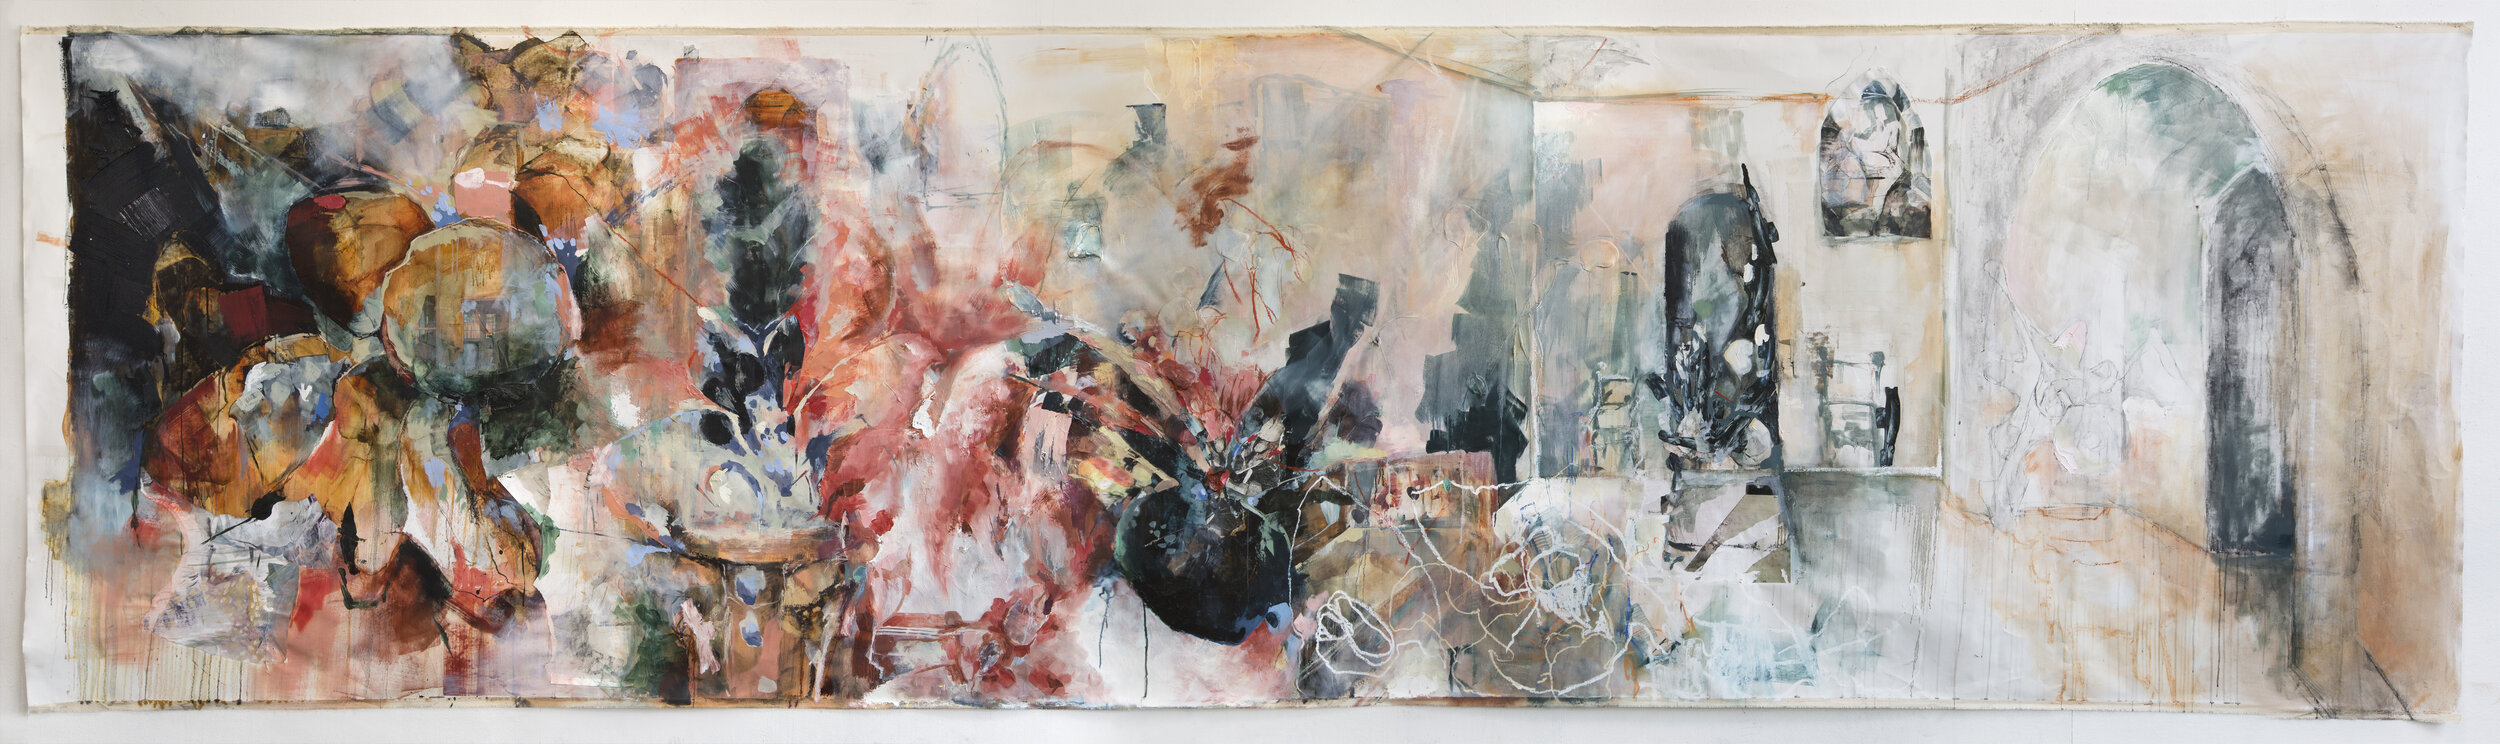   Flesh Fountain , Oil and Mixed Media on  Canvas,   64.5”x 216”, 2021 